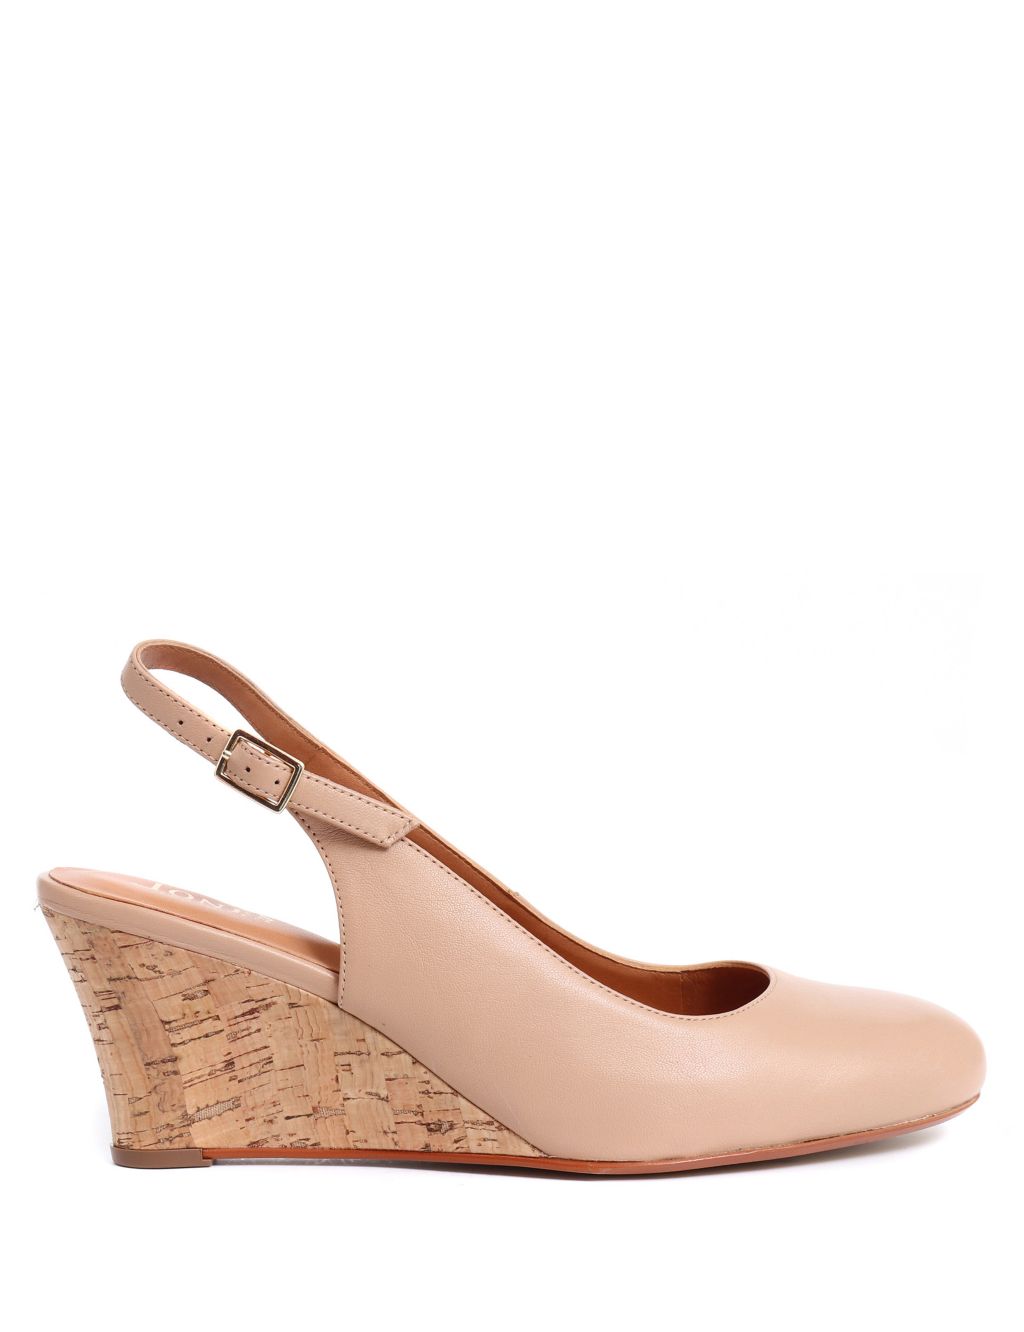 Suede Wedge Slingback Shoes image 2